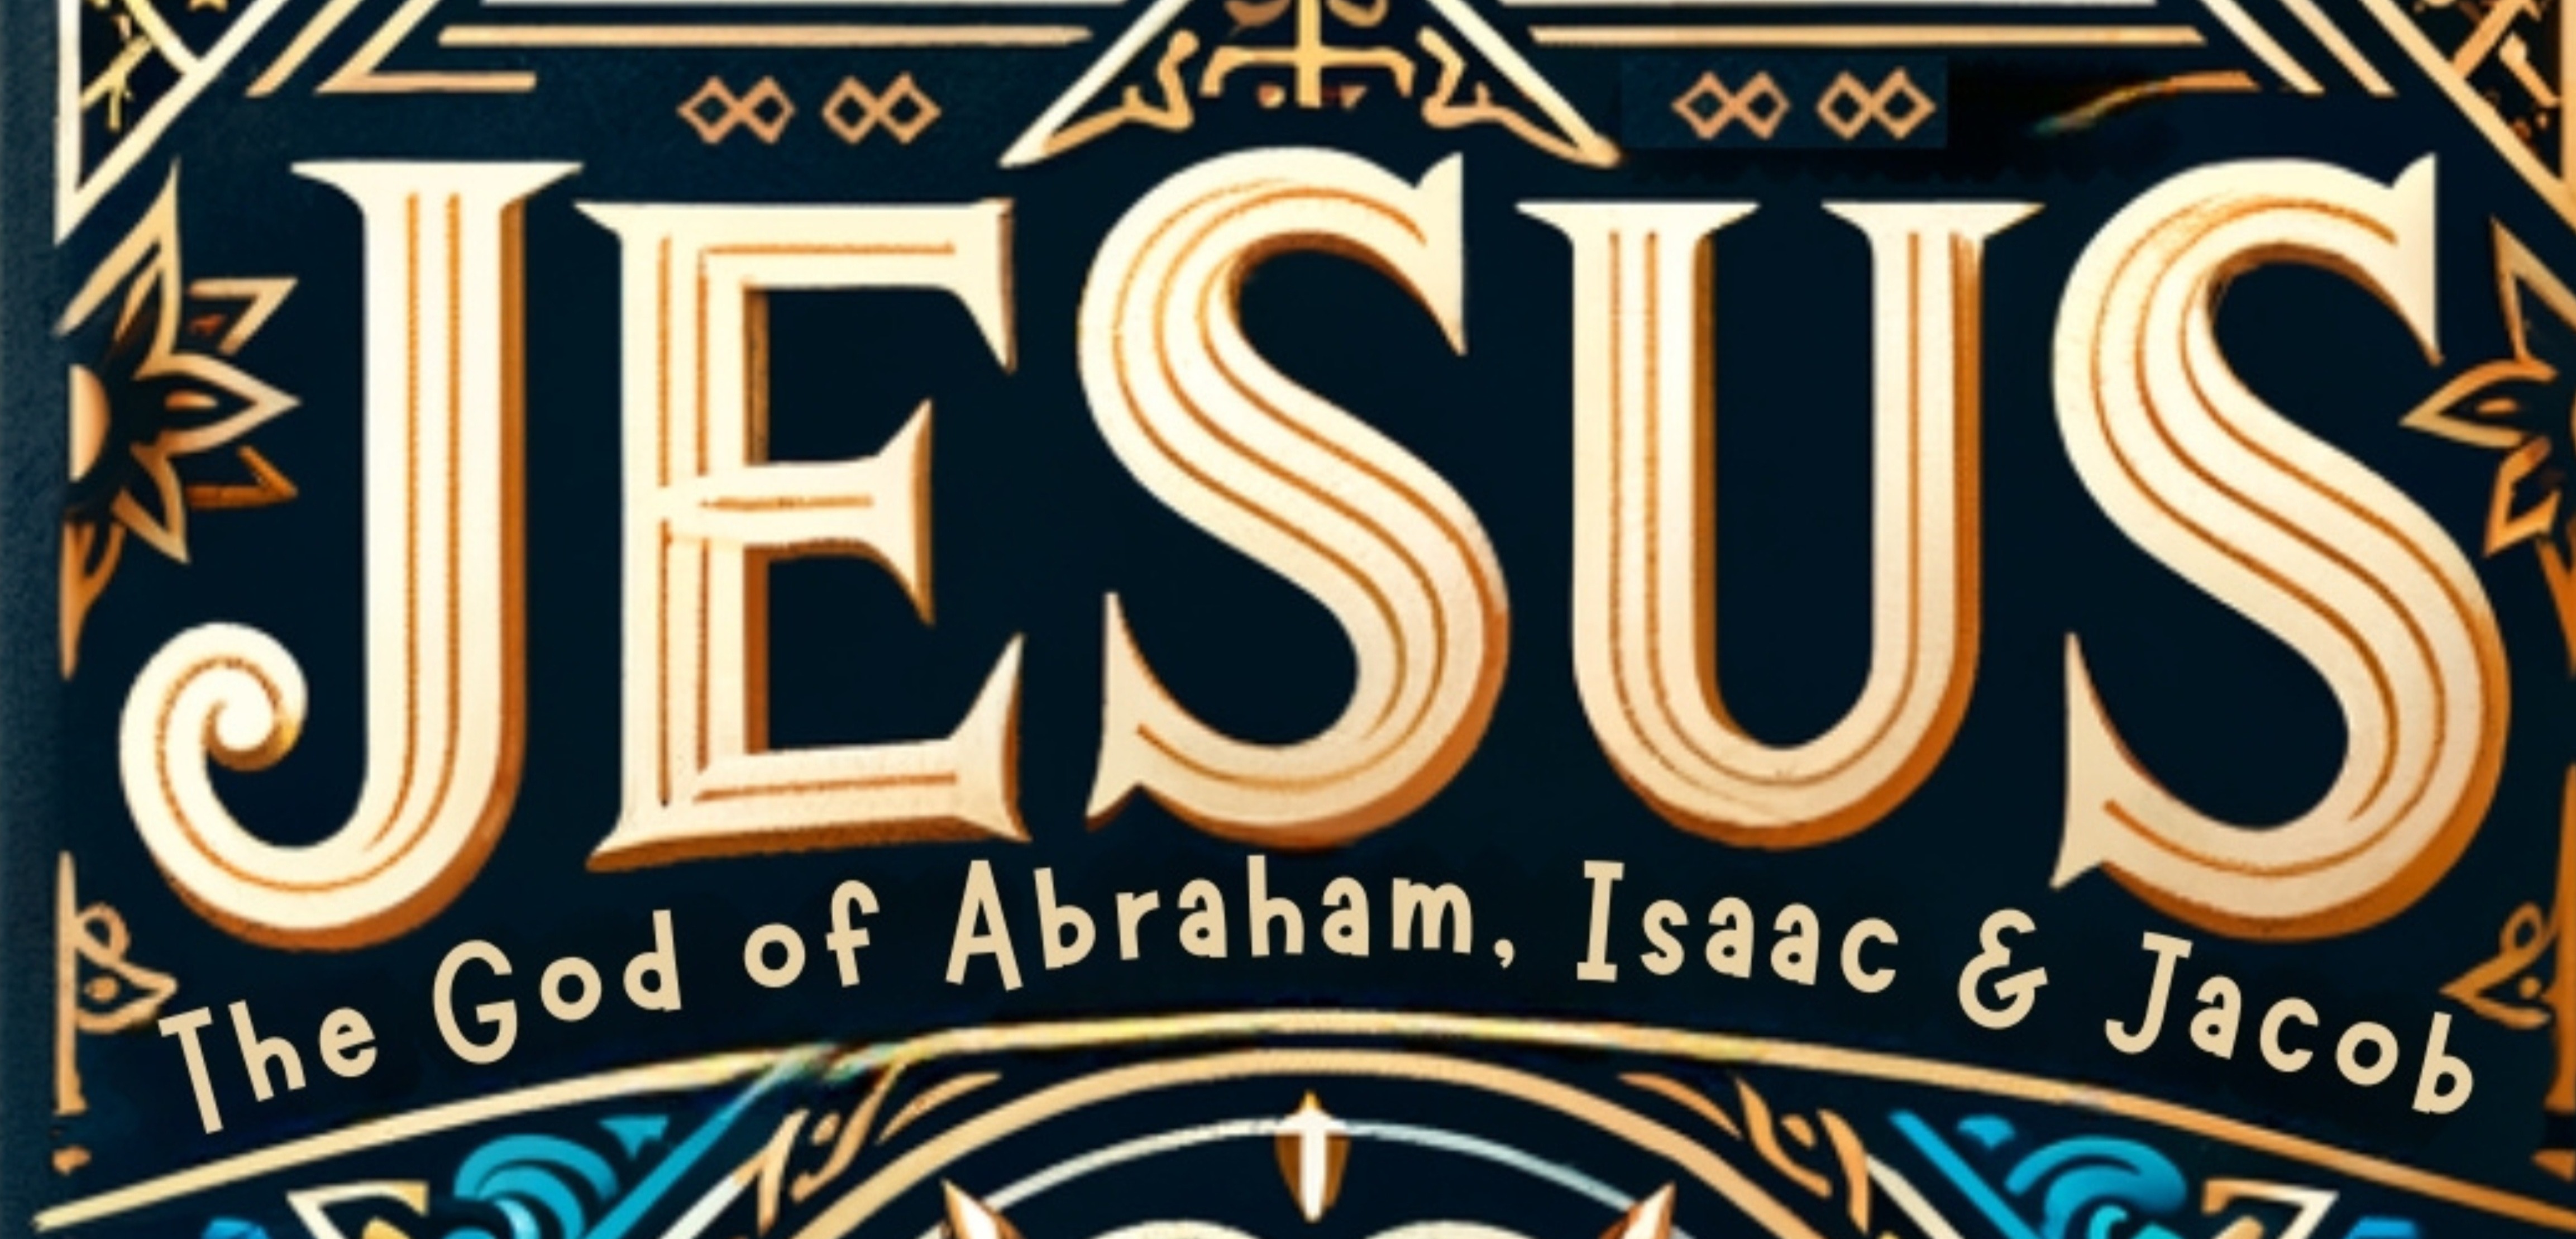 Jesus: The God of Abraham, Isaac and Jacob